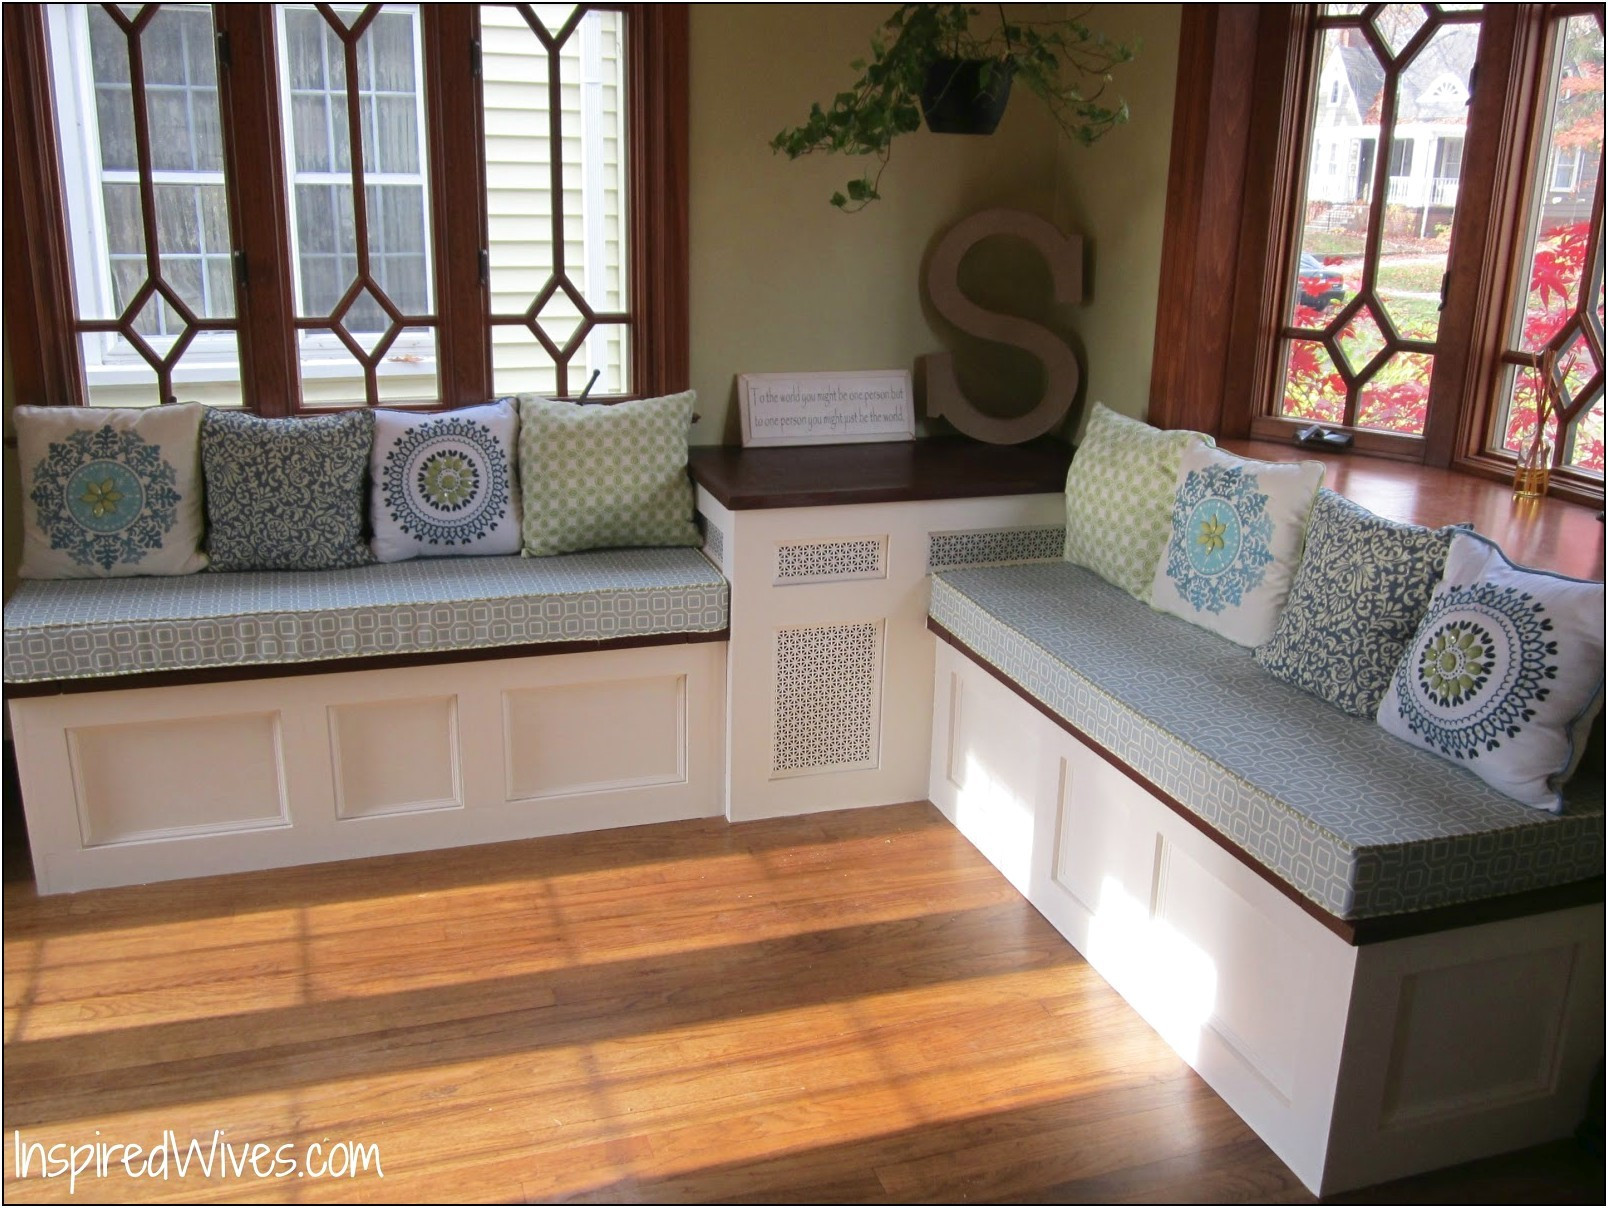 Kitchen Bench Storage
 The Beauty and Benefits of the Kitchen Storage Bench Bee